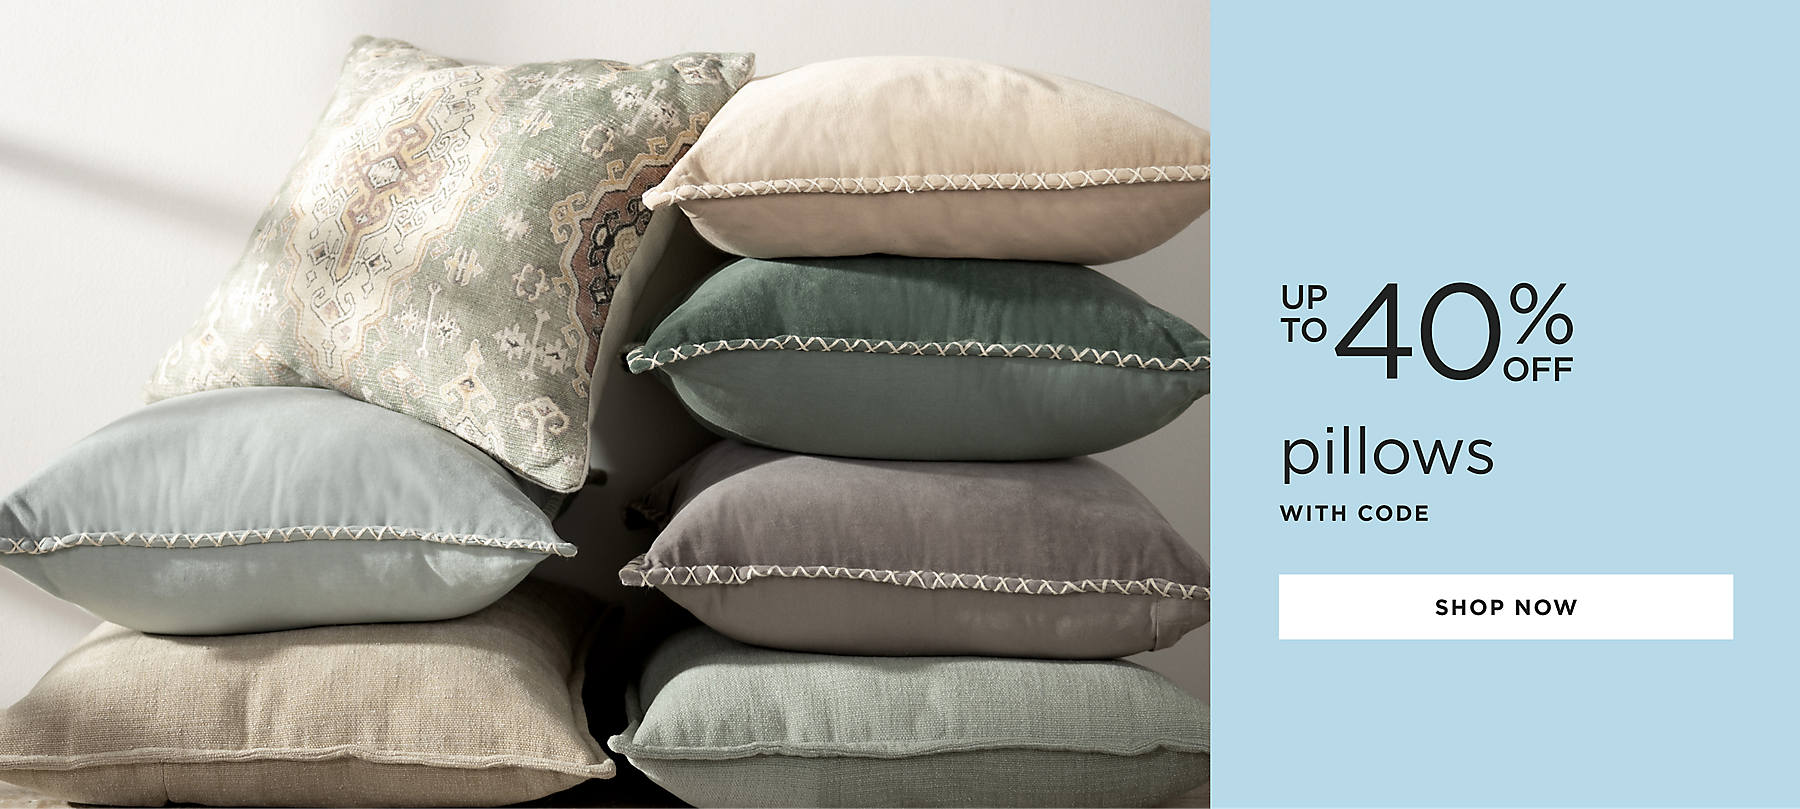 pillows up to 40% off with code shop now